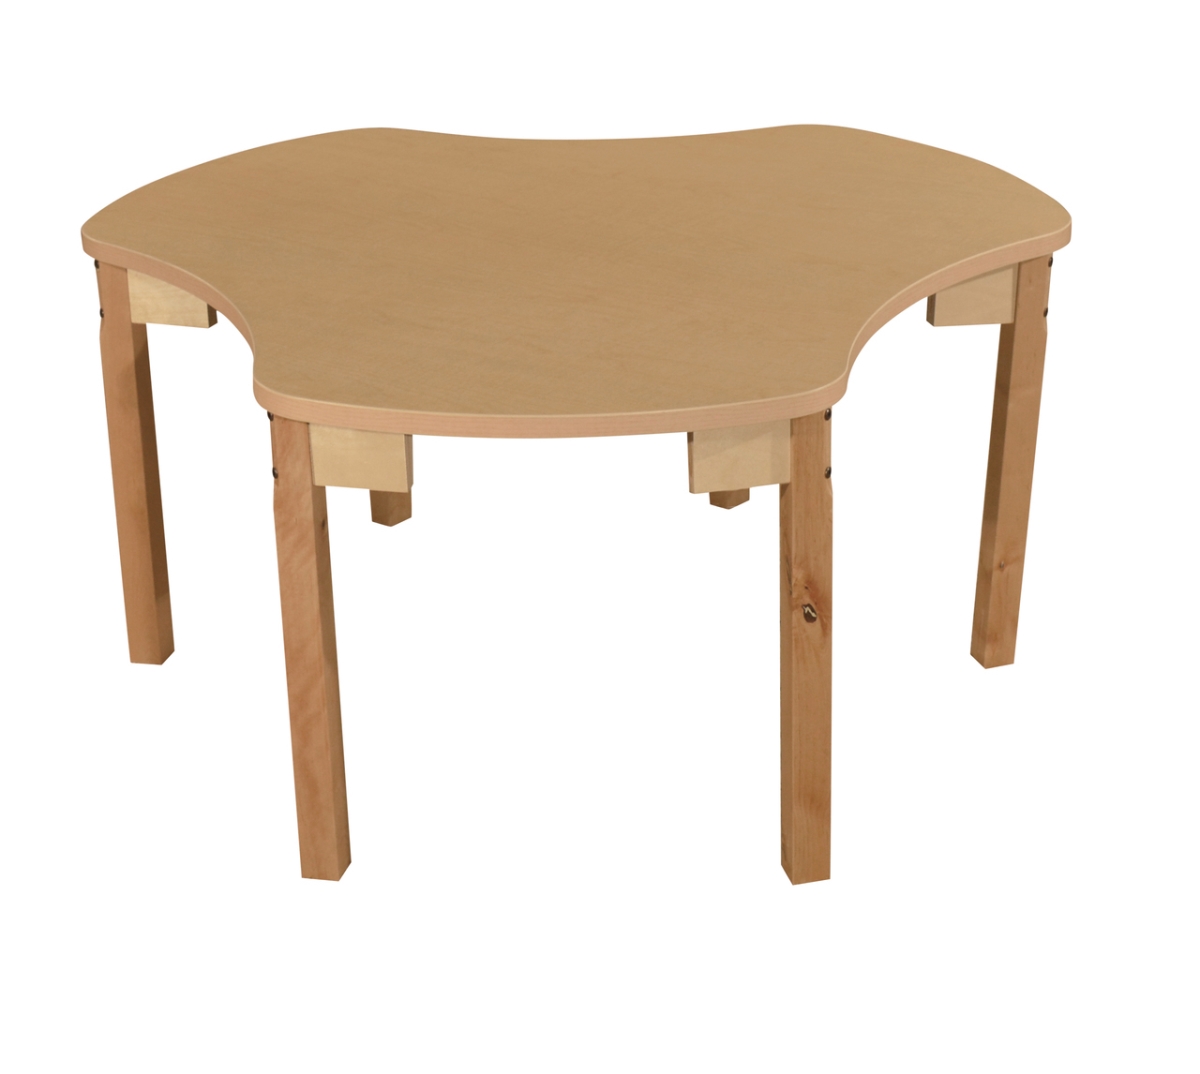 Picture of Wood Designs HPL4448C22 44 x 48 in. Synergy Union High Pressure Laminate Group Table with Hardwood Legs- 22 in.